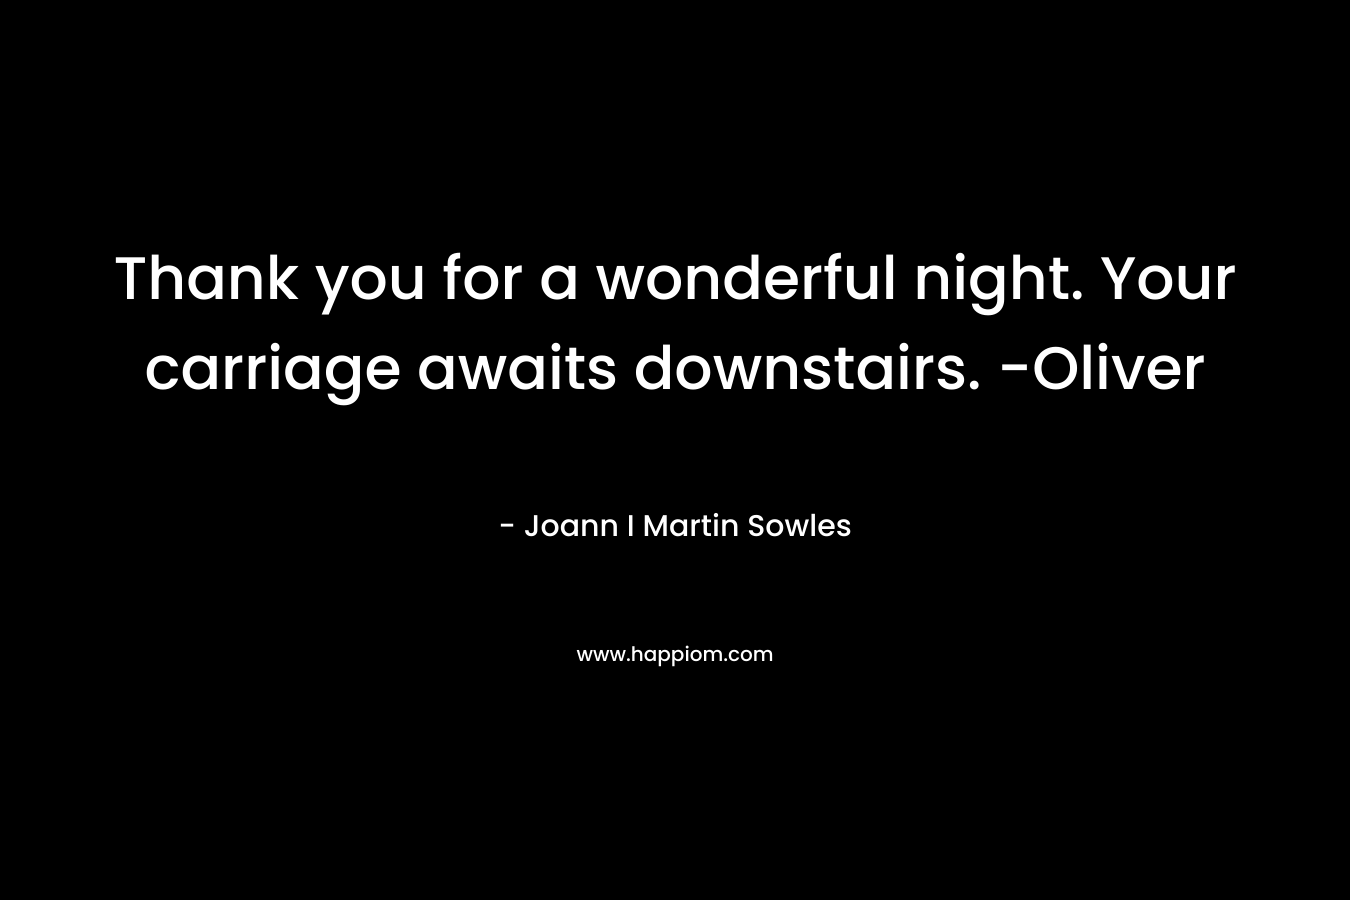 Thank you for a wonderful night. Your carriage awaits downstairs. -Oliver – Joann I Martin Sowles